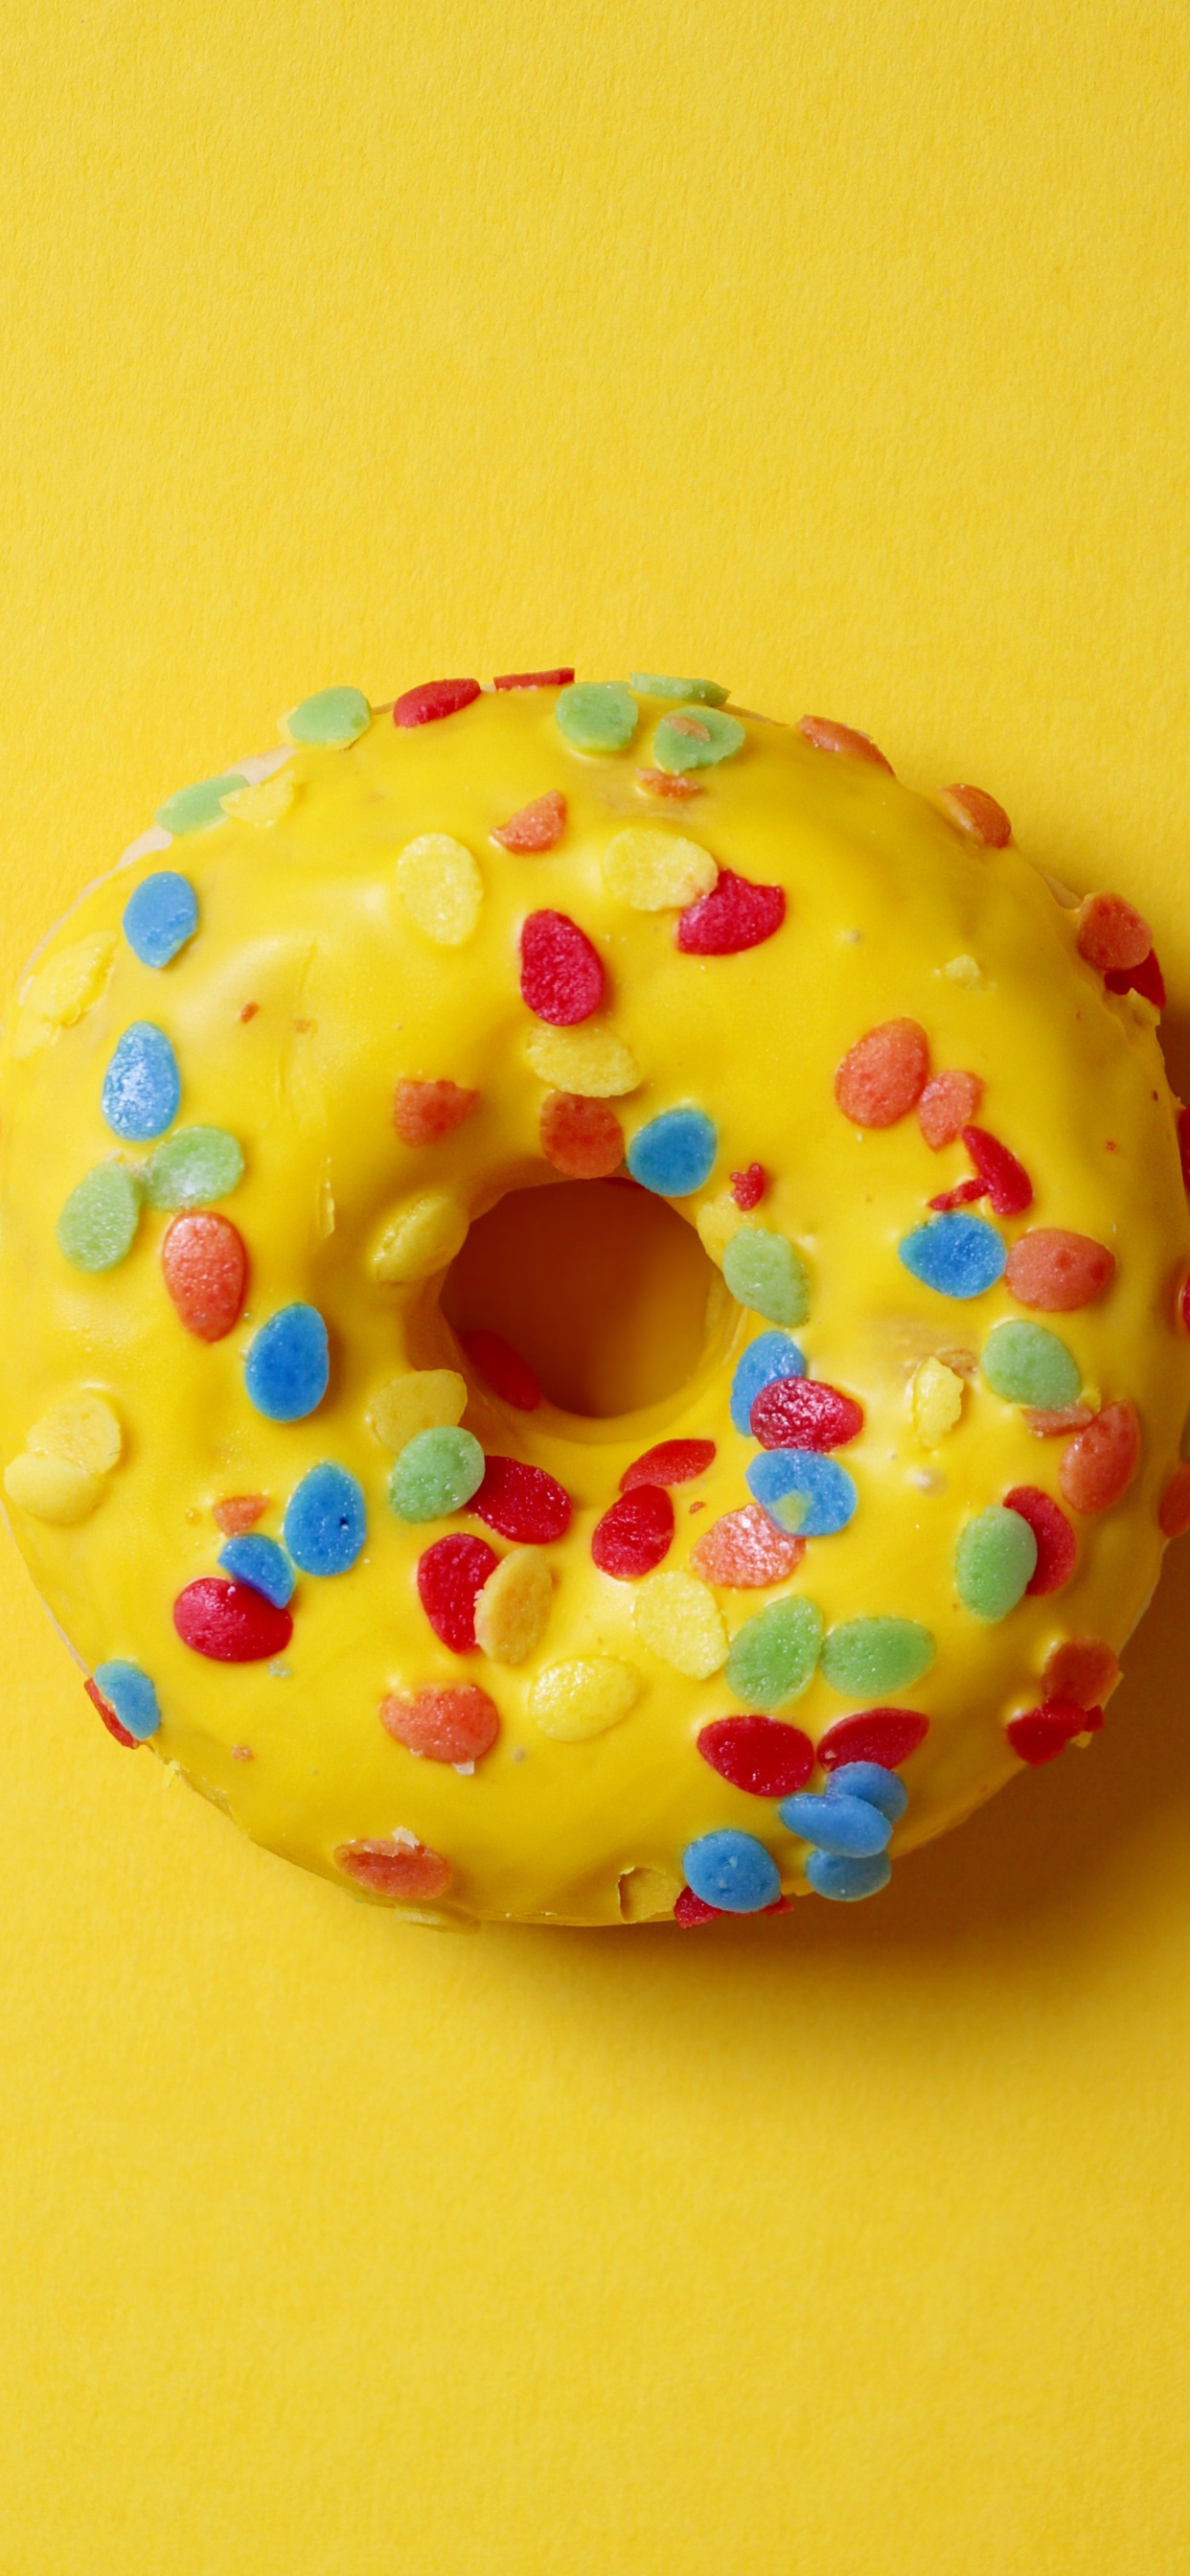 Doughnut With Sprinkles on Yellow Surface. Wallpaper in 1242x2688 Resolution